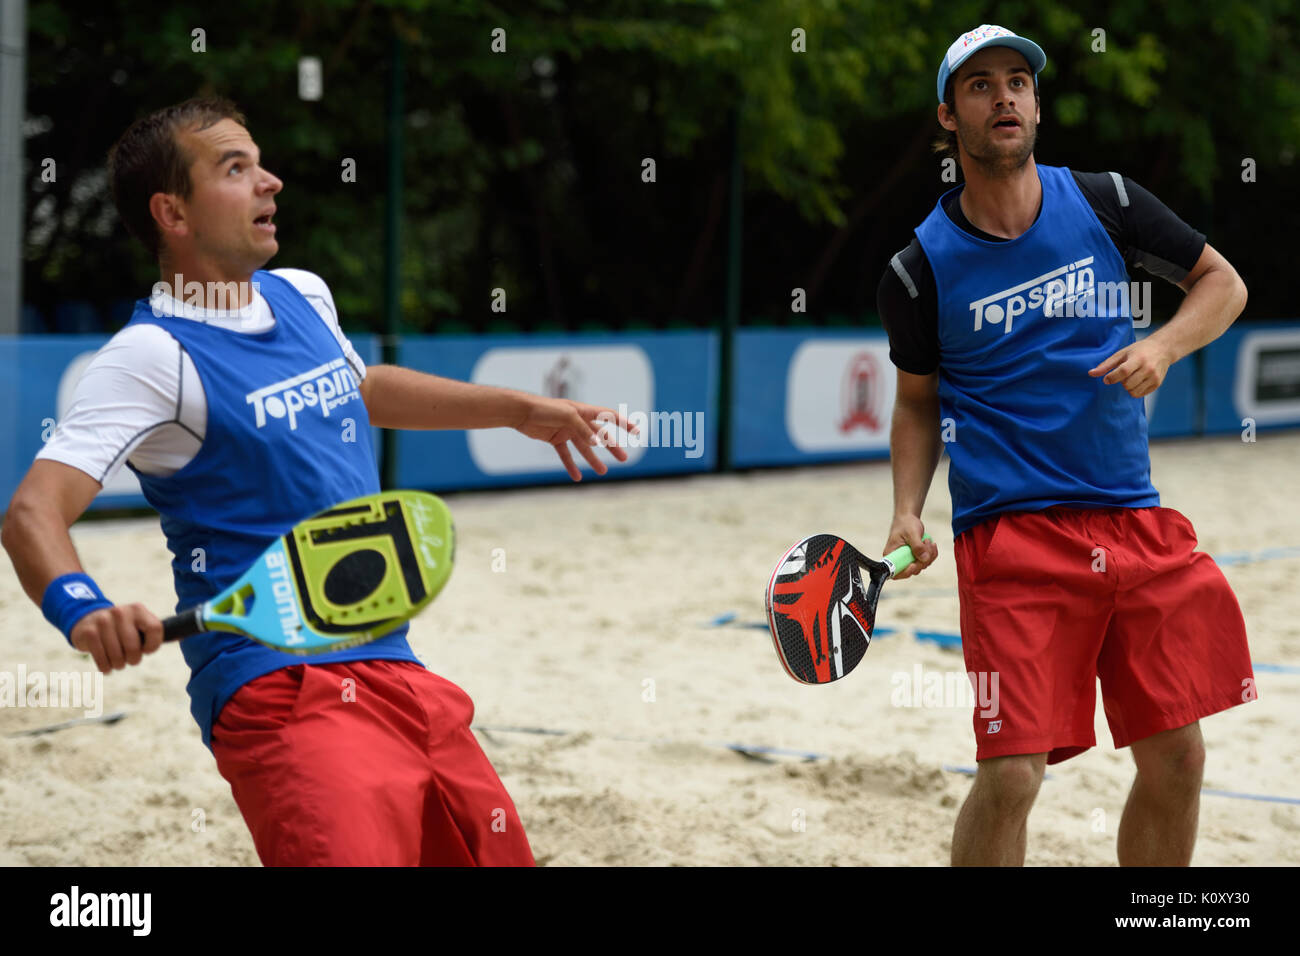 Moscow, Russia - July 15, 2015: Vojtech Dohnal (left) and Jan Sykora of Czech Republic in action during the ITF Beach Tennis World Team Championship.  Stock Photo